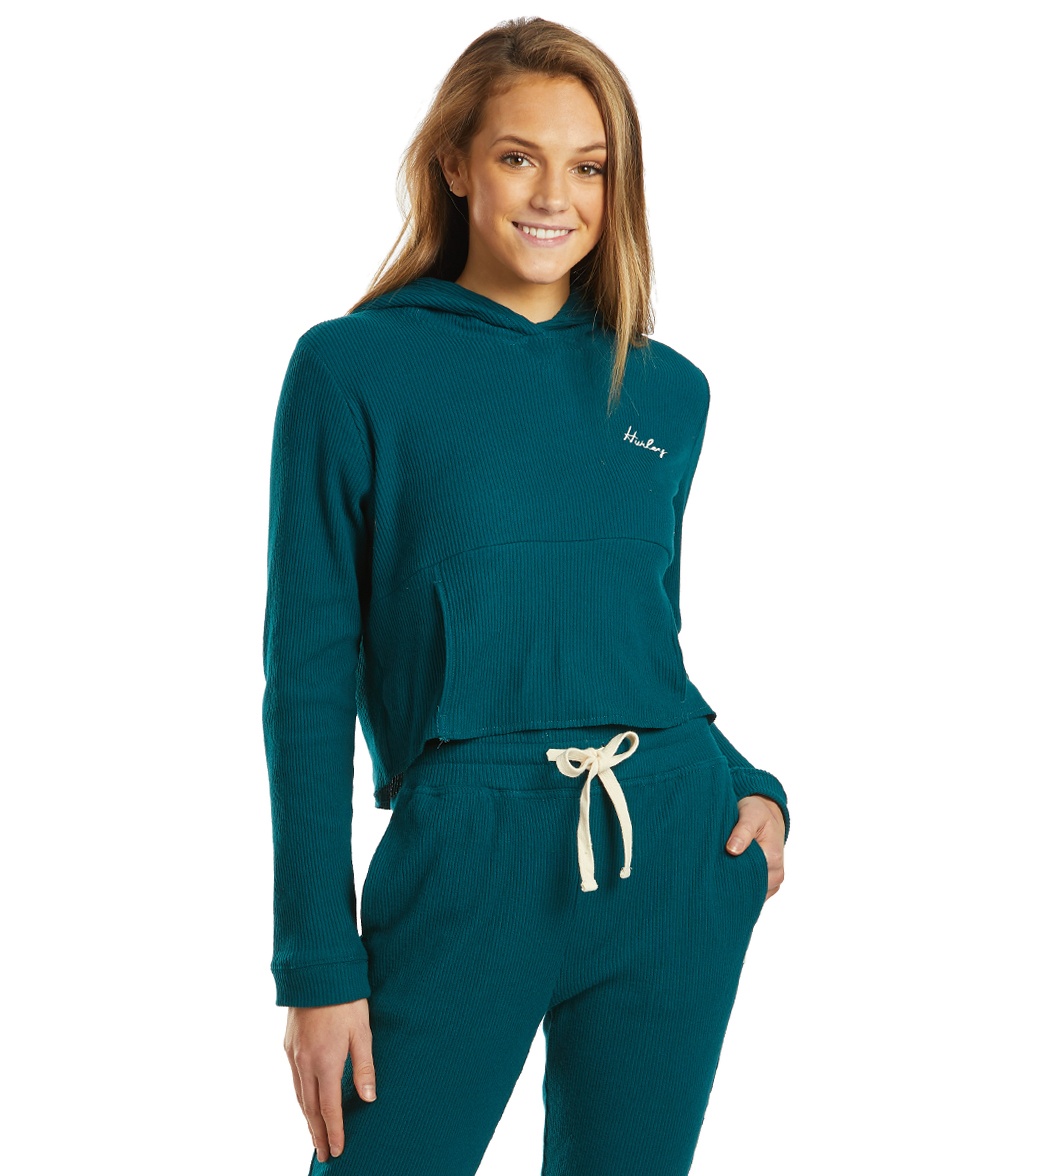 Hurley Women's Chill Rib Fleece Crop Pullover - Midnight Turquoise Large Cotton/Polyester - Swimoutlet.com